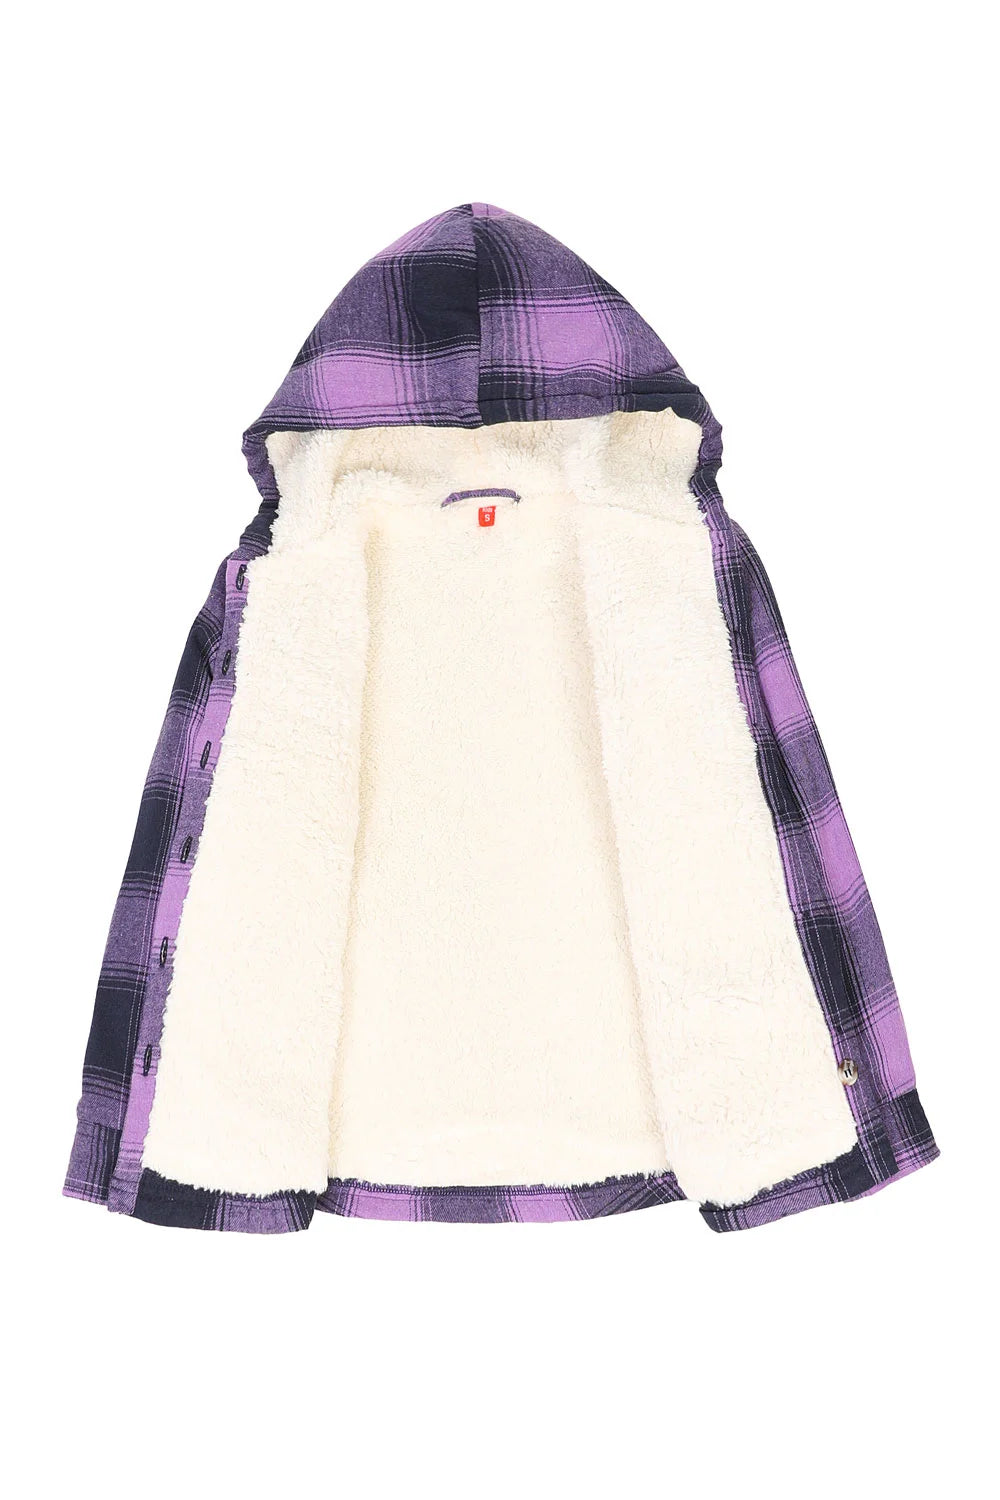 Girls Hooded Plaid Flannel Shirt Jacket,Sherpa Lined